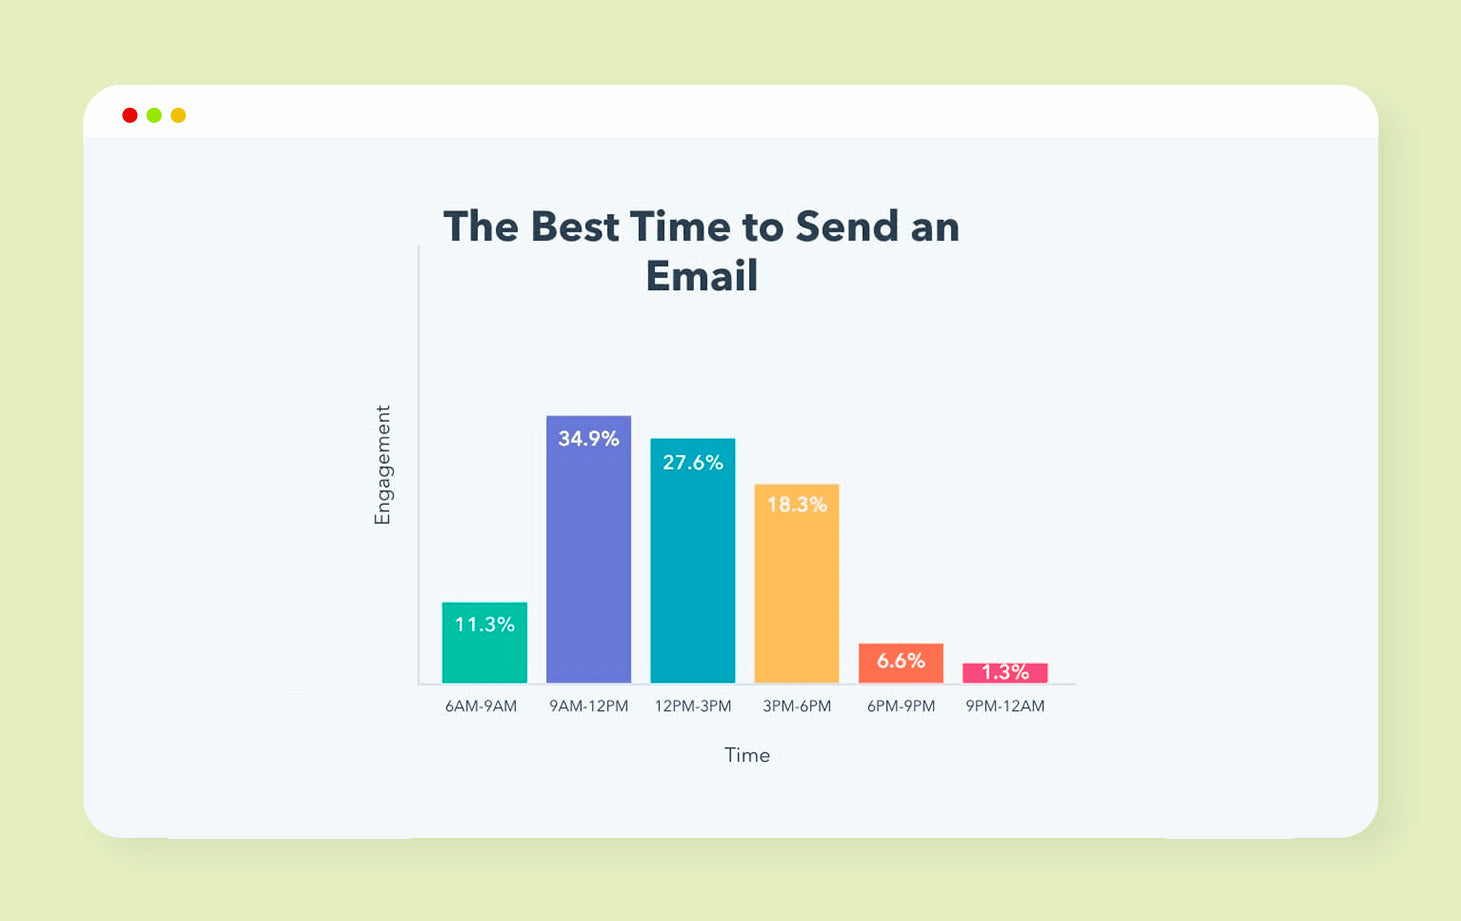 Shopify Email Marketing : 9 Best Practices For Your Ecommerce Business